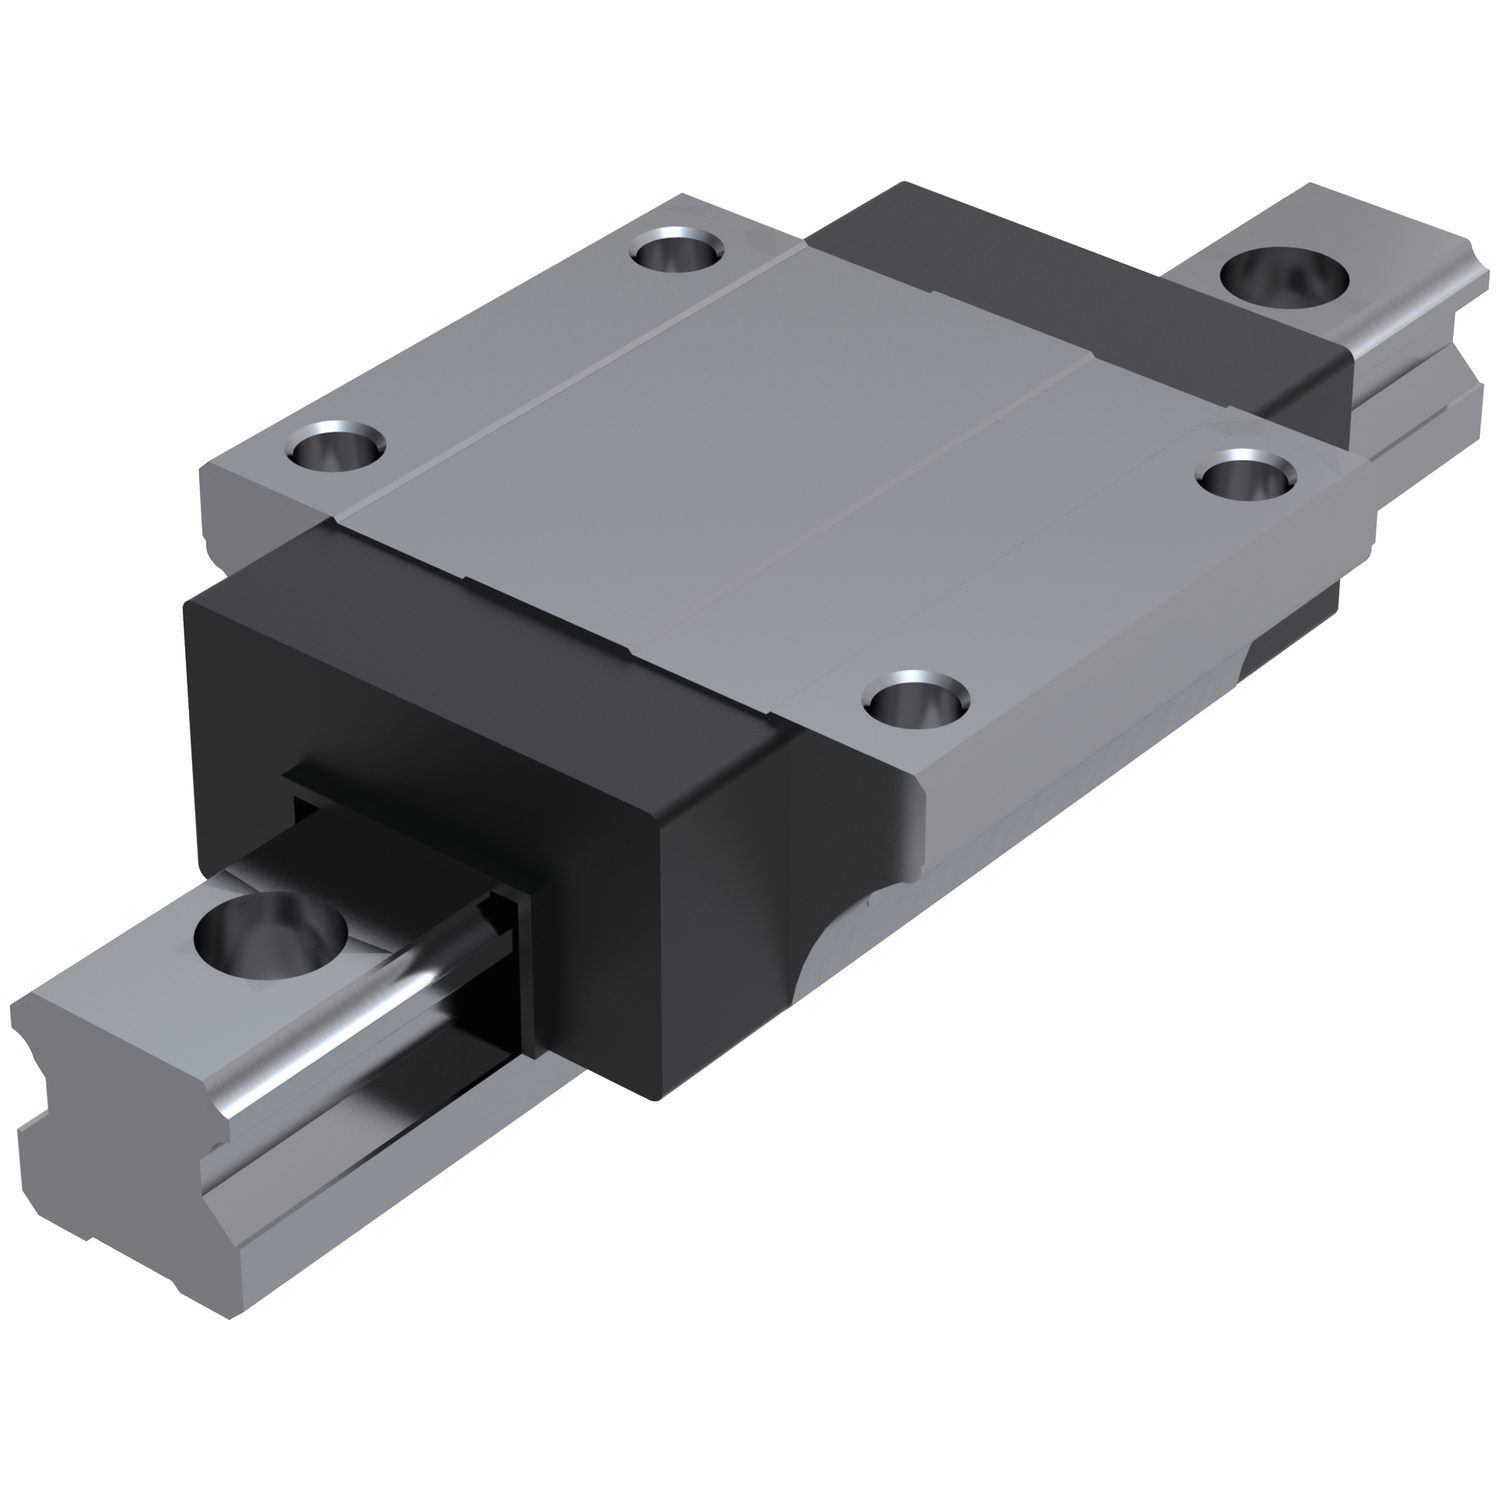 Linear Guideways Our most popular linear guide systems with either flanged or un-flanged carriages (L1016.F or L1016.U). Width sizes 15, 20, 25, 30, 35, 45 and 55mm. Lengths up to 4 metres and rear-fixing rails also stocked (L1016.RF). Ultra-low profile carriages also available (L1016.UL).